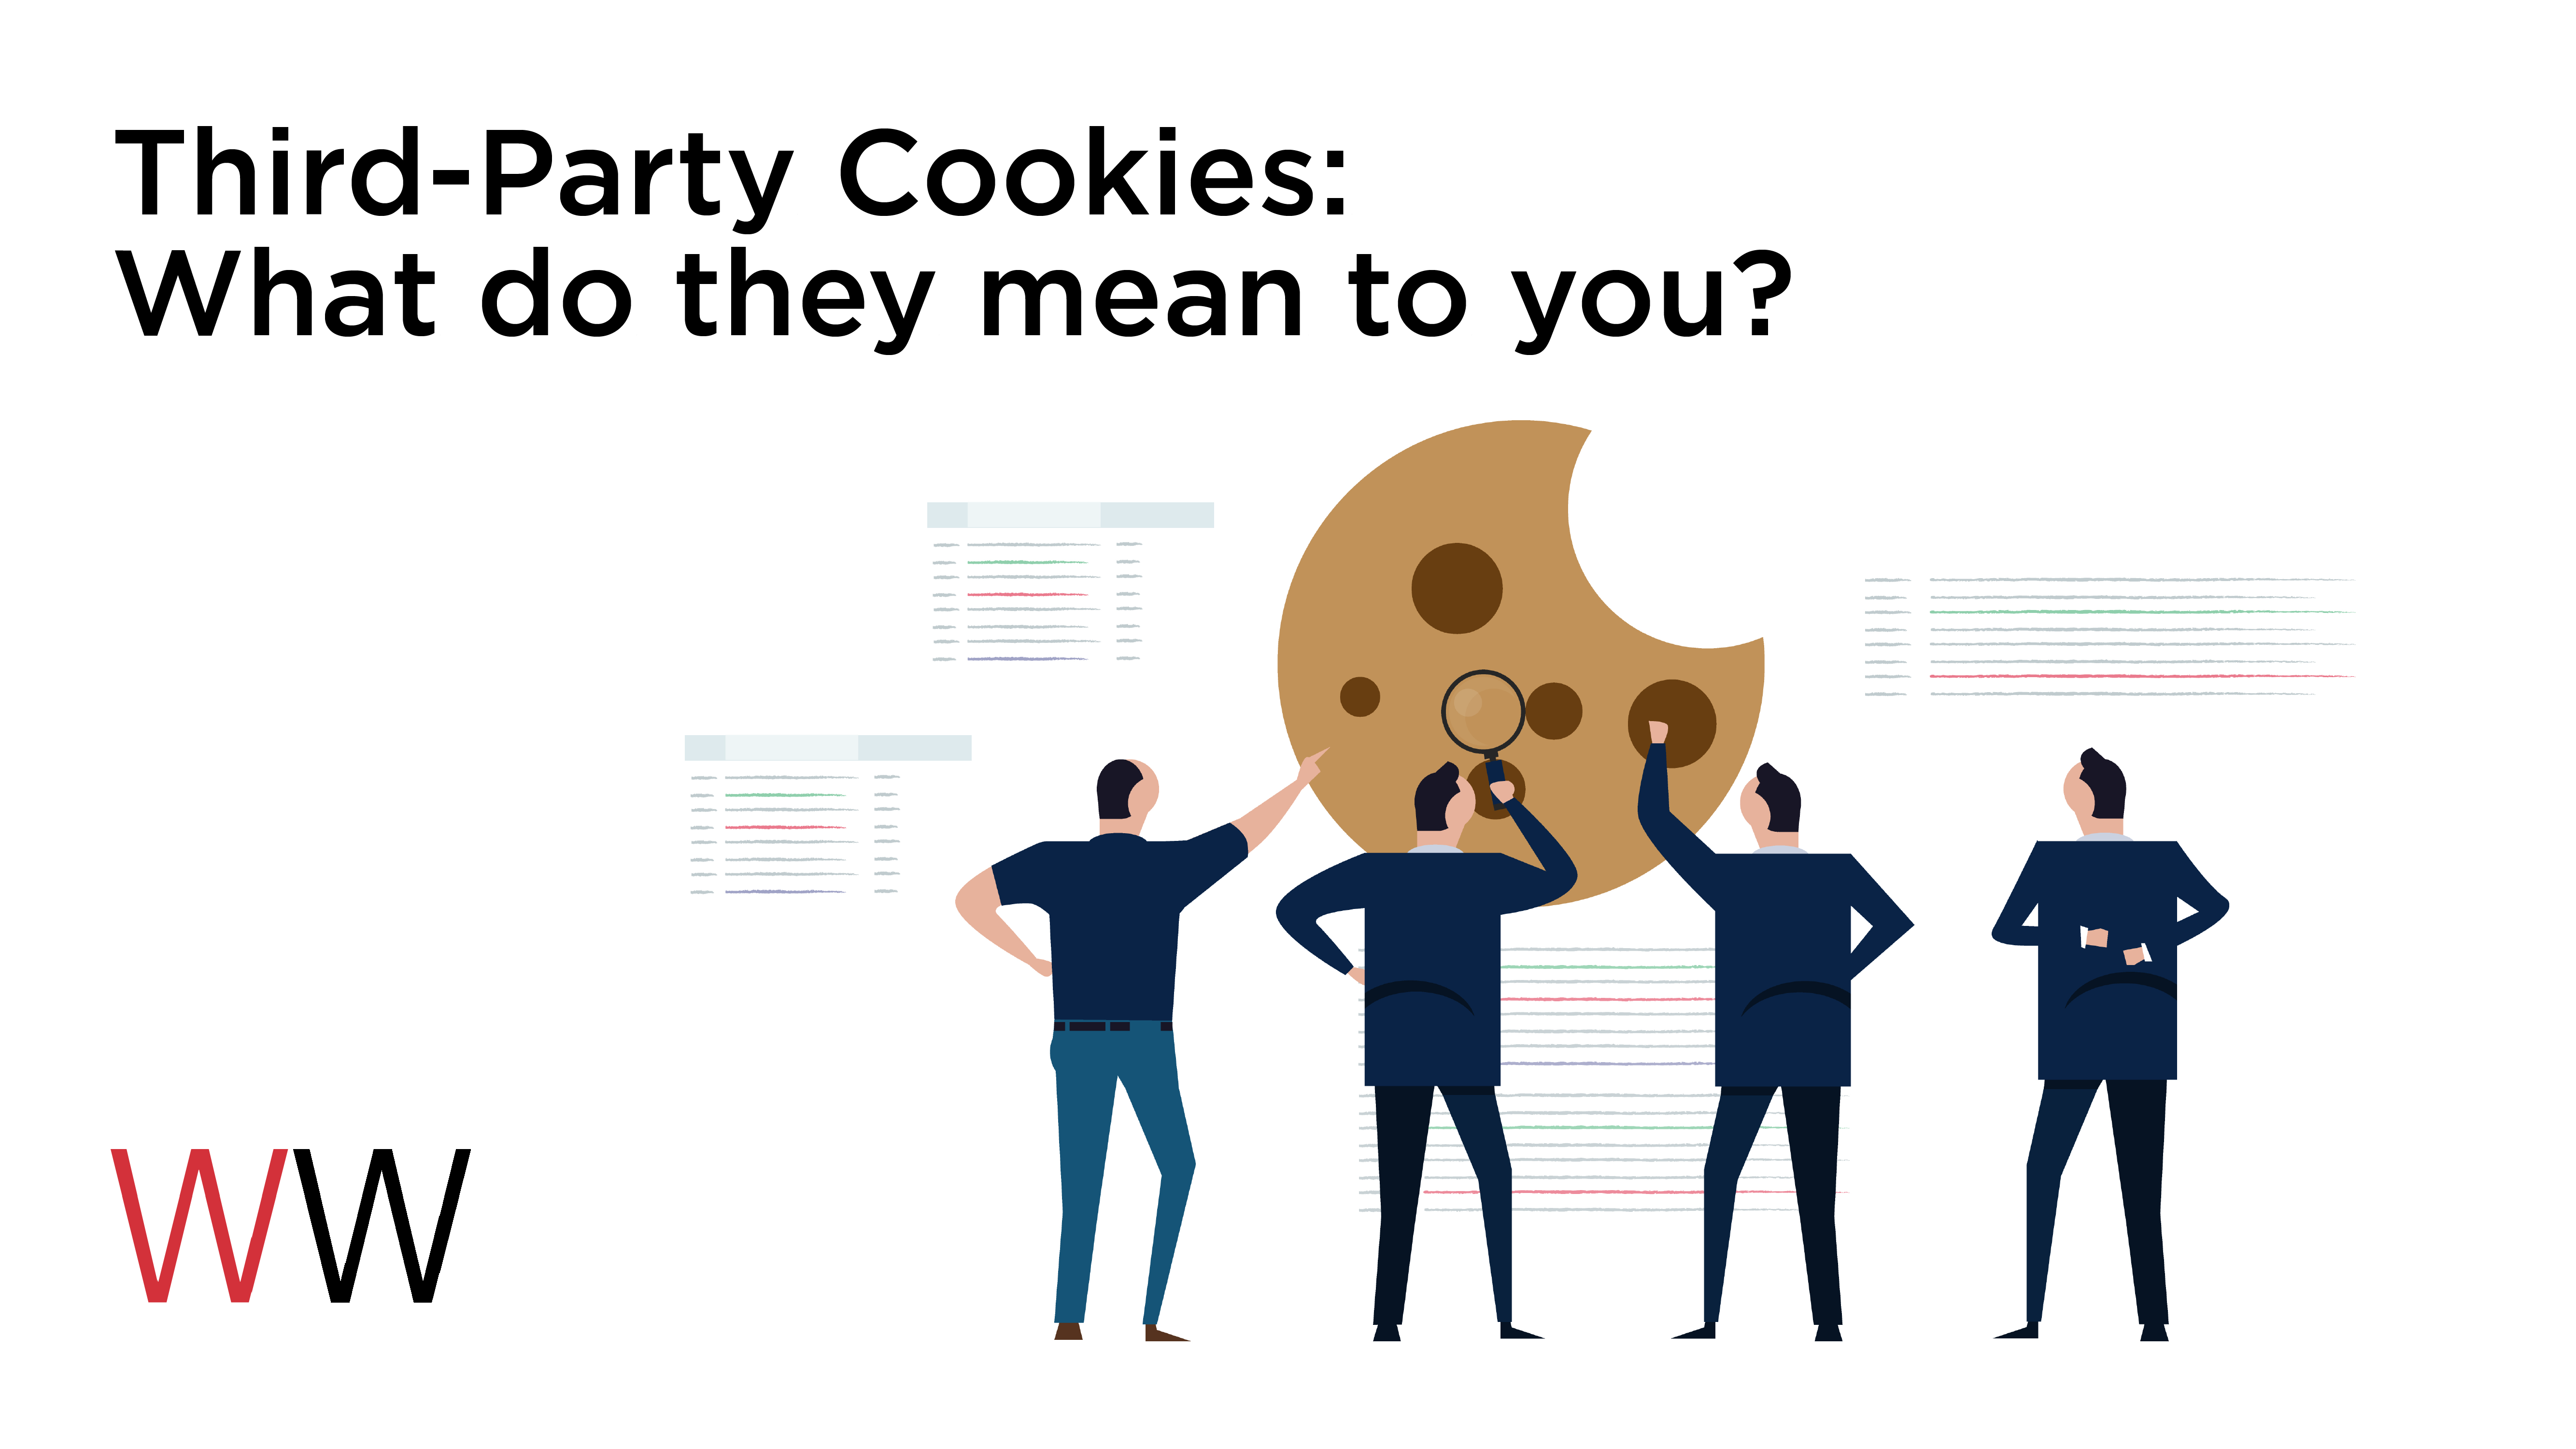 Third-Party Cookies: What do they mean to you?